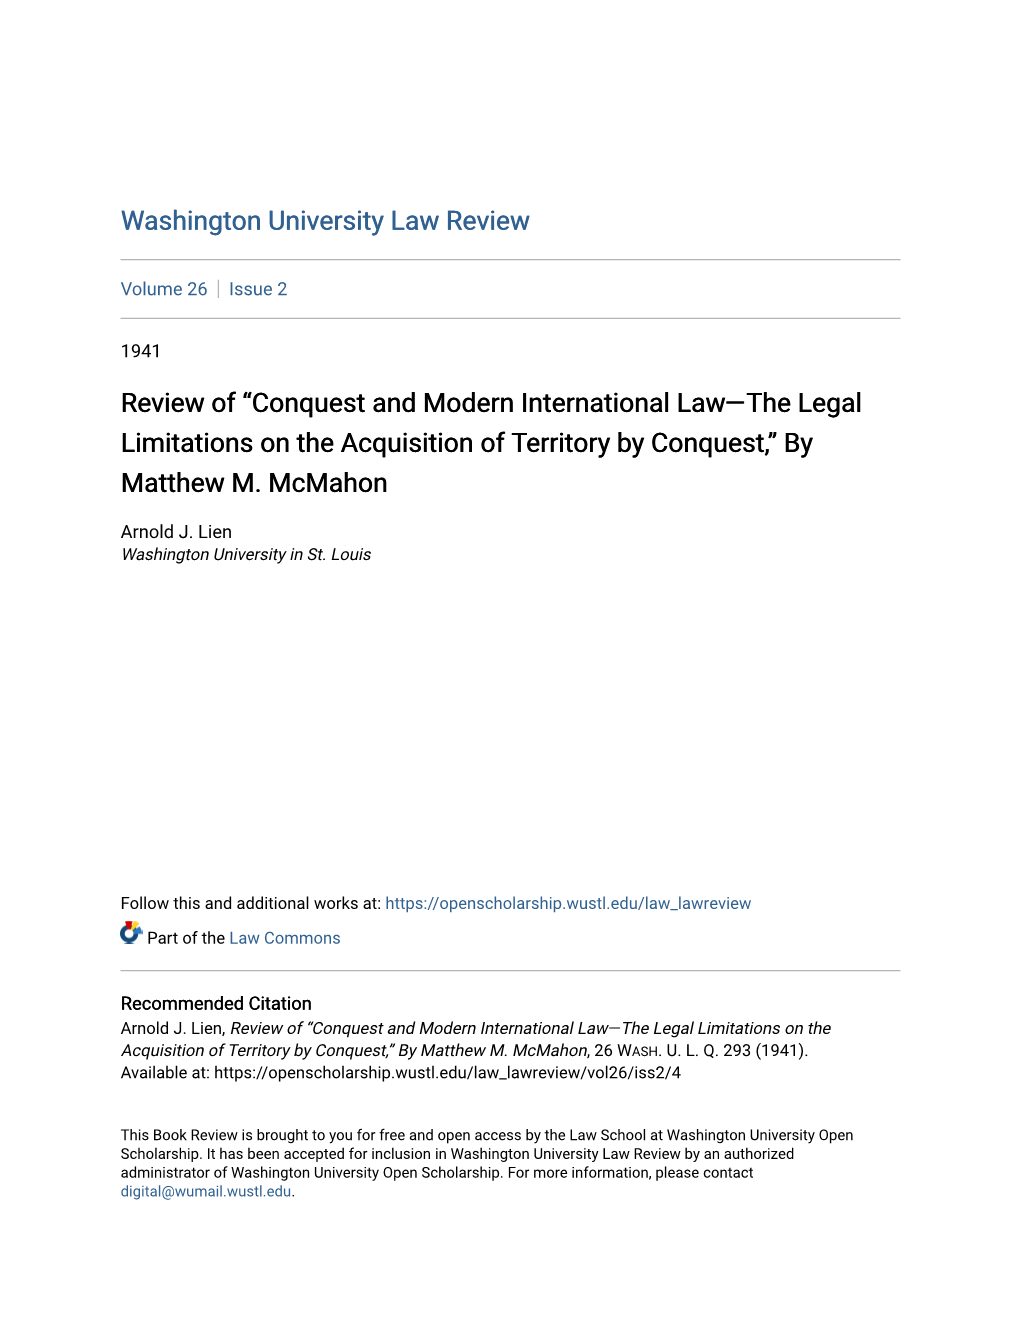 Review of “Conquest and Modern International Law—The Legal Limitations on the Acquisition of Territory by Conquest,” by Matthew M